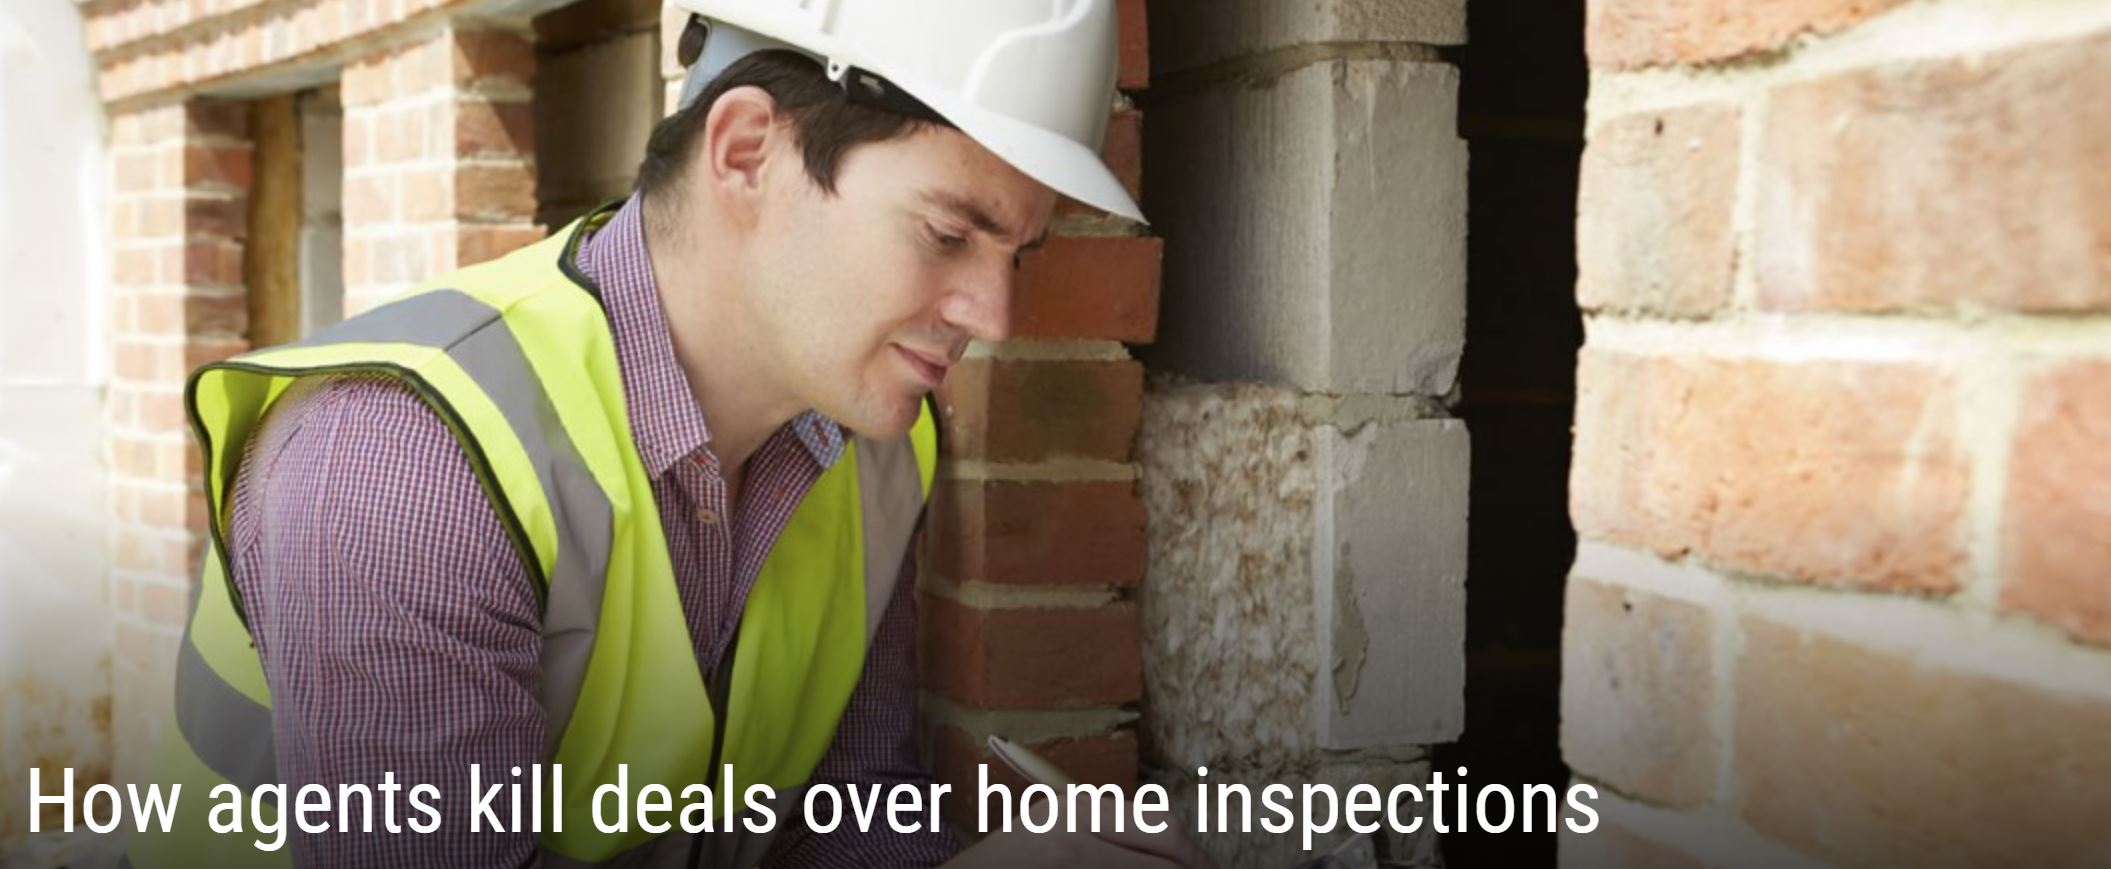 How agents kill deals over home inspections